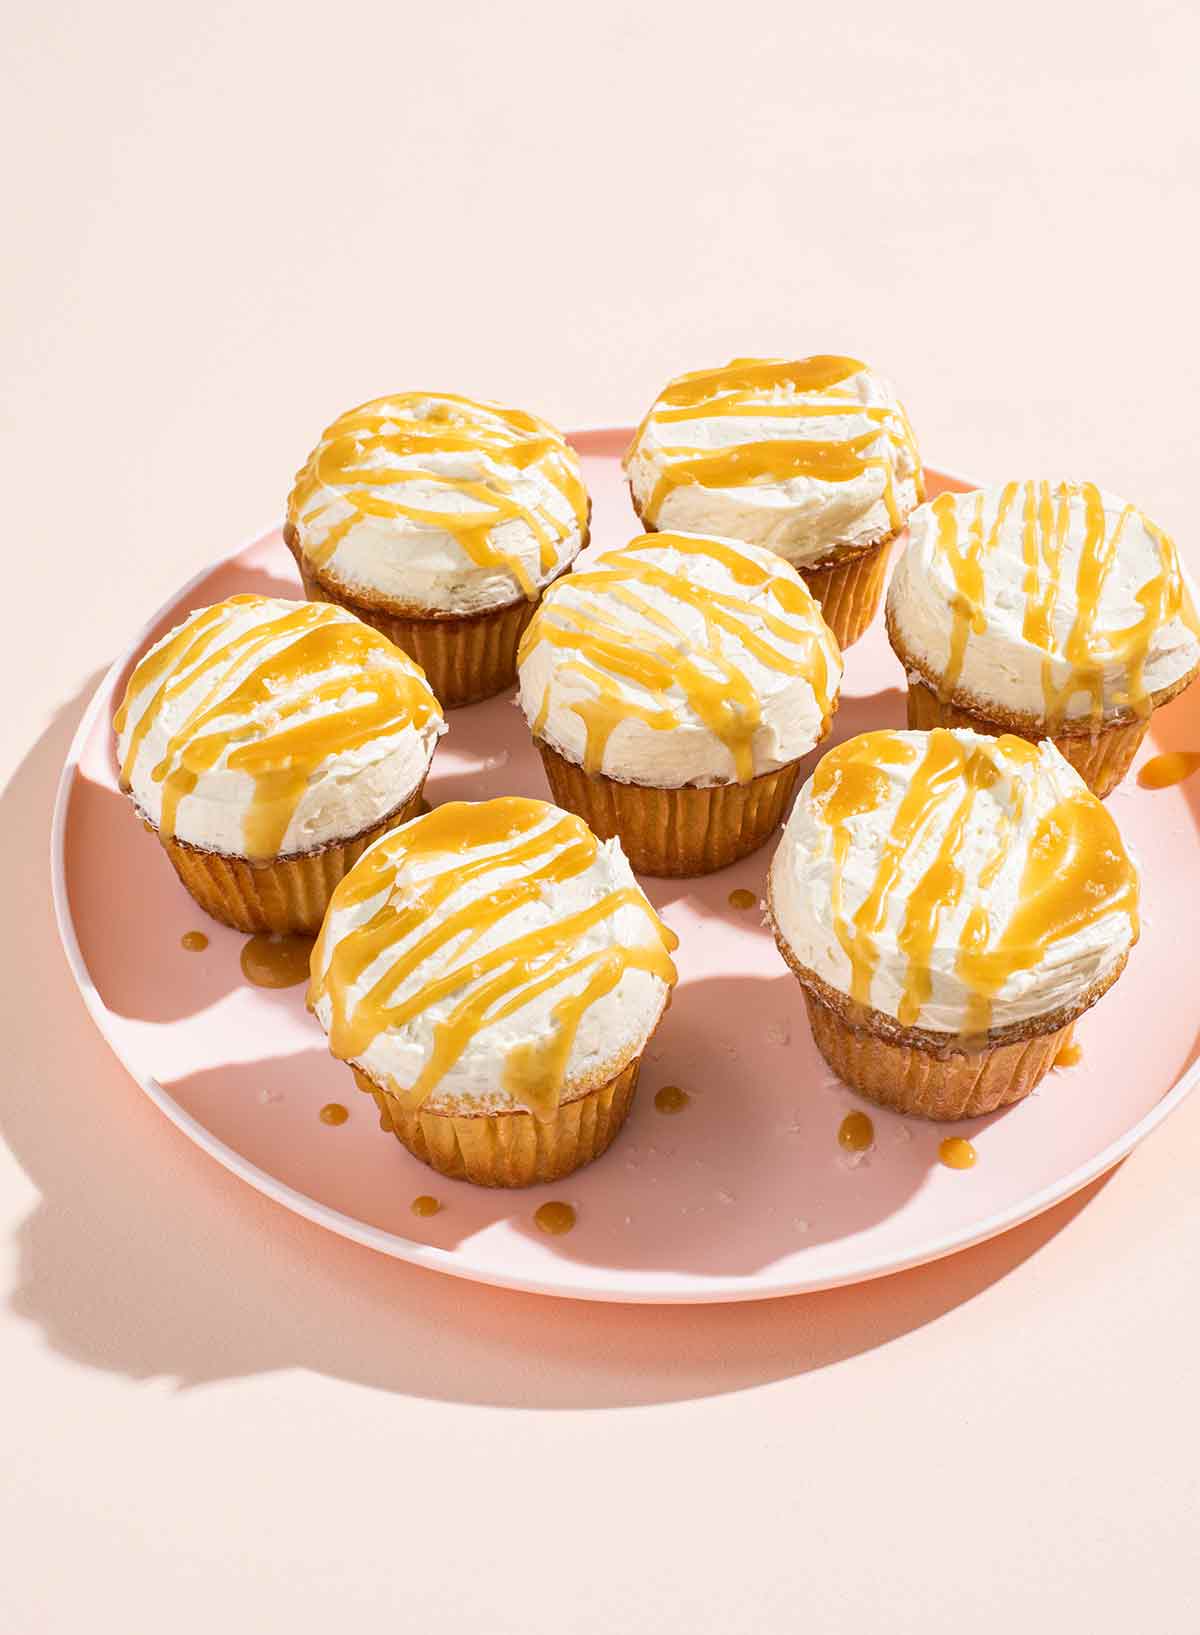 Seven frosted cupcakes with butterscotch drizzled on top on a pink plate.